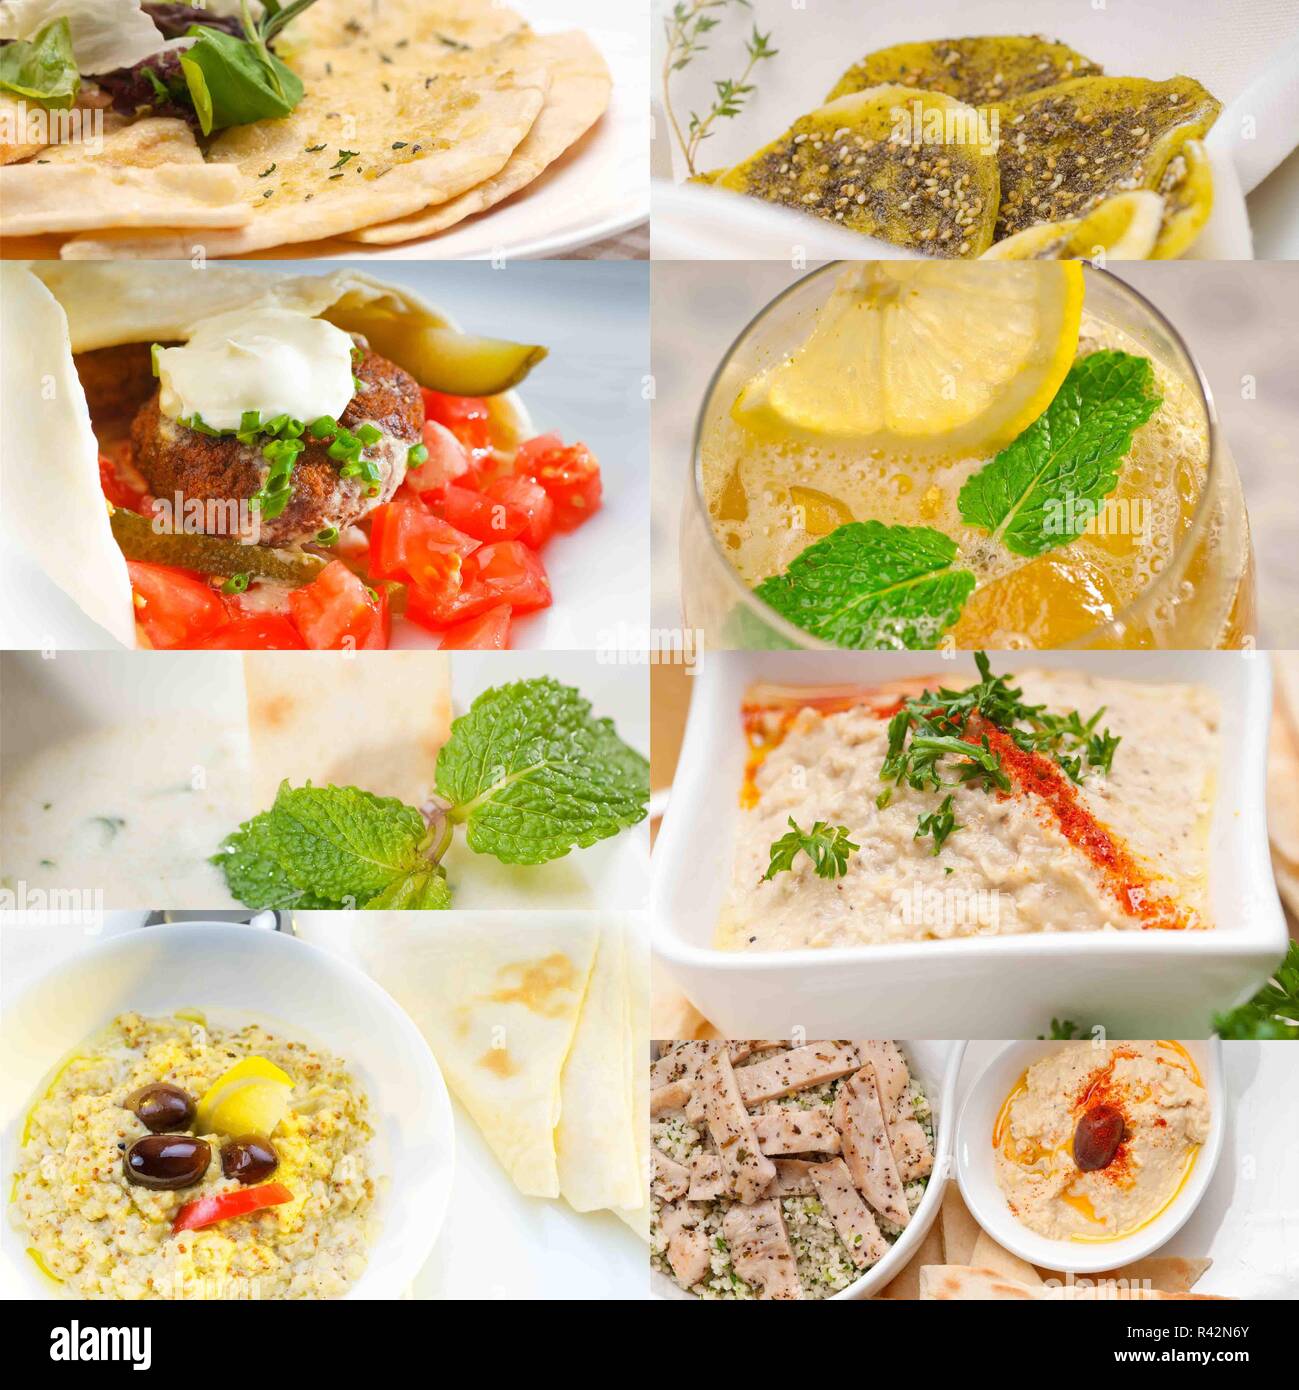 Middle East food collage Banque D'Images